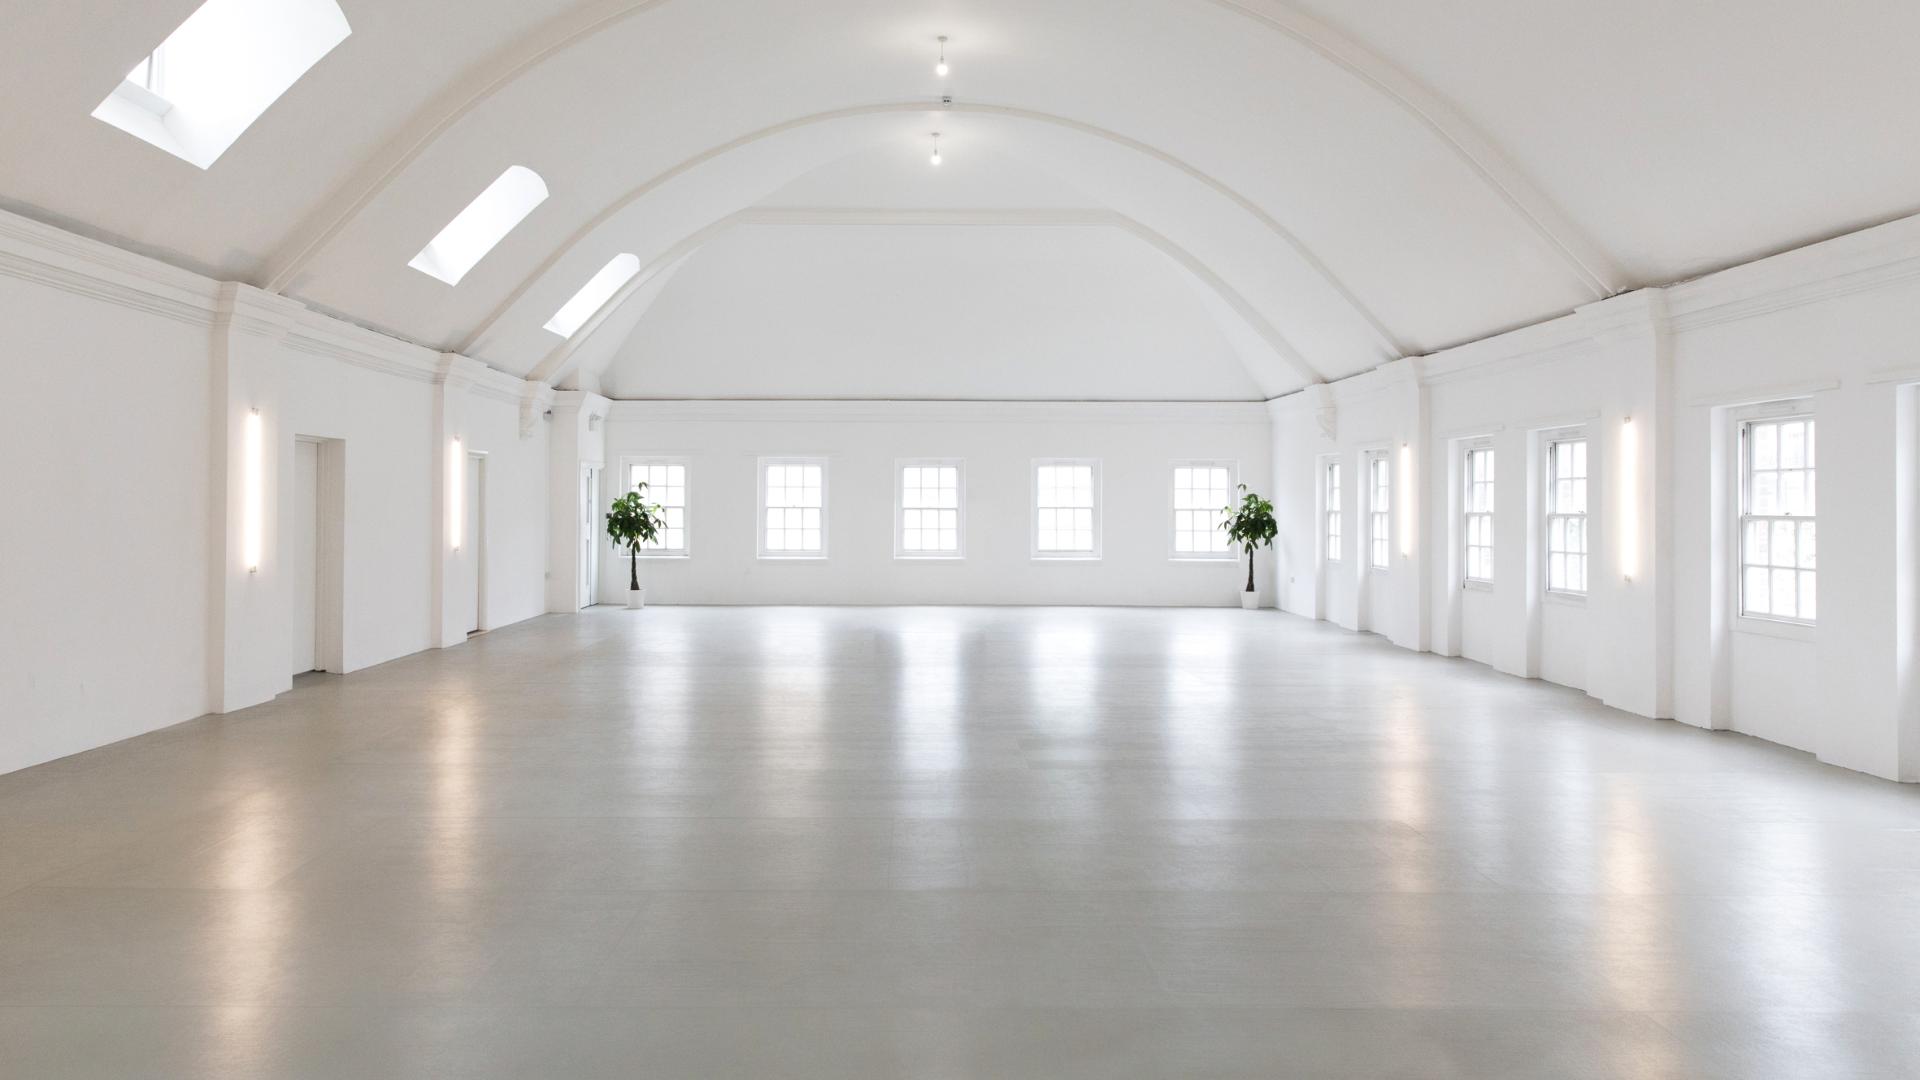 Dry Hire Venues for Hire in London